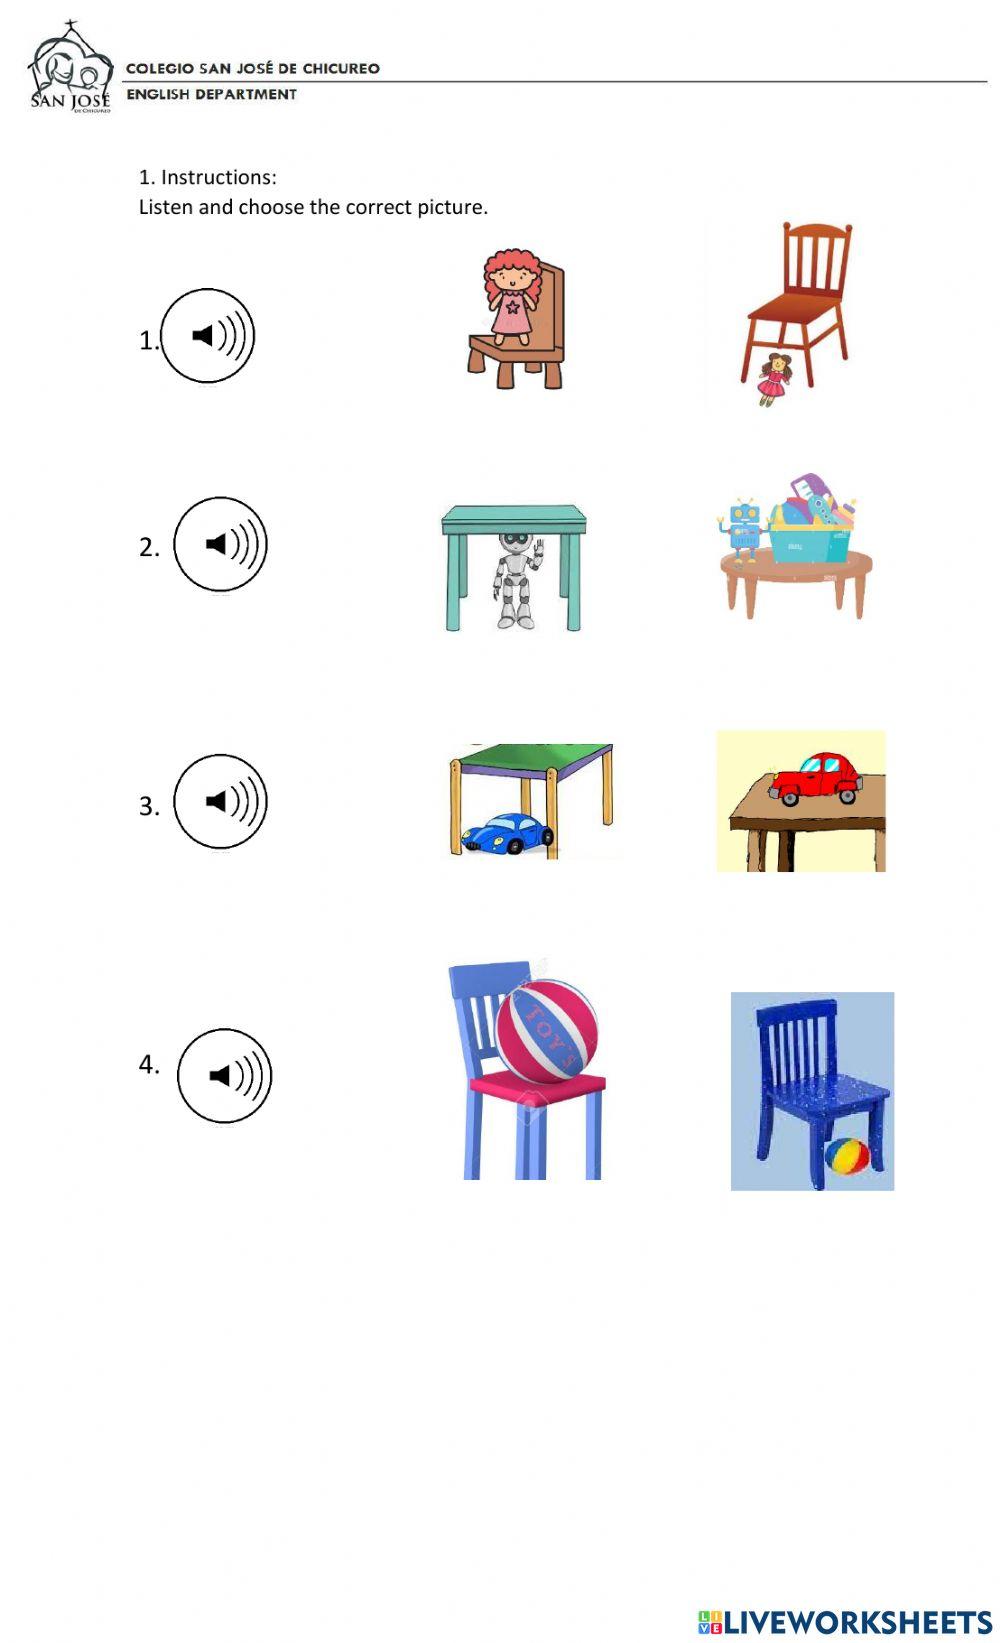 Preposition and toys